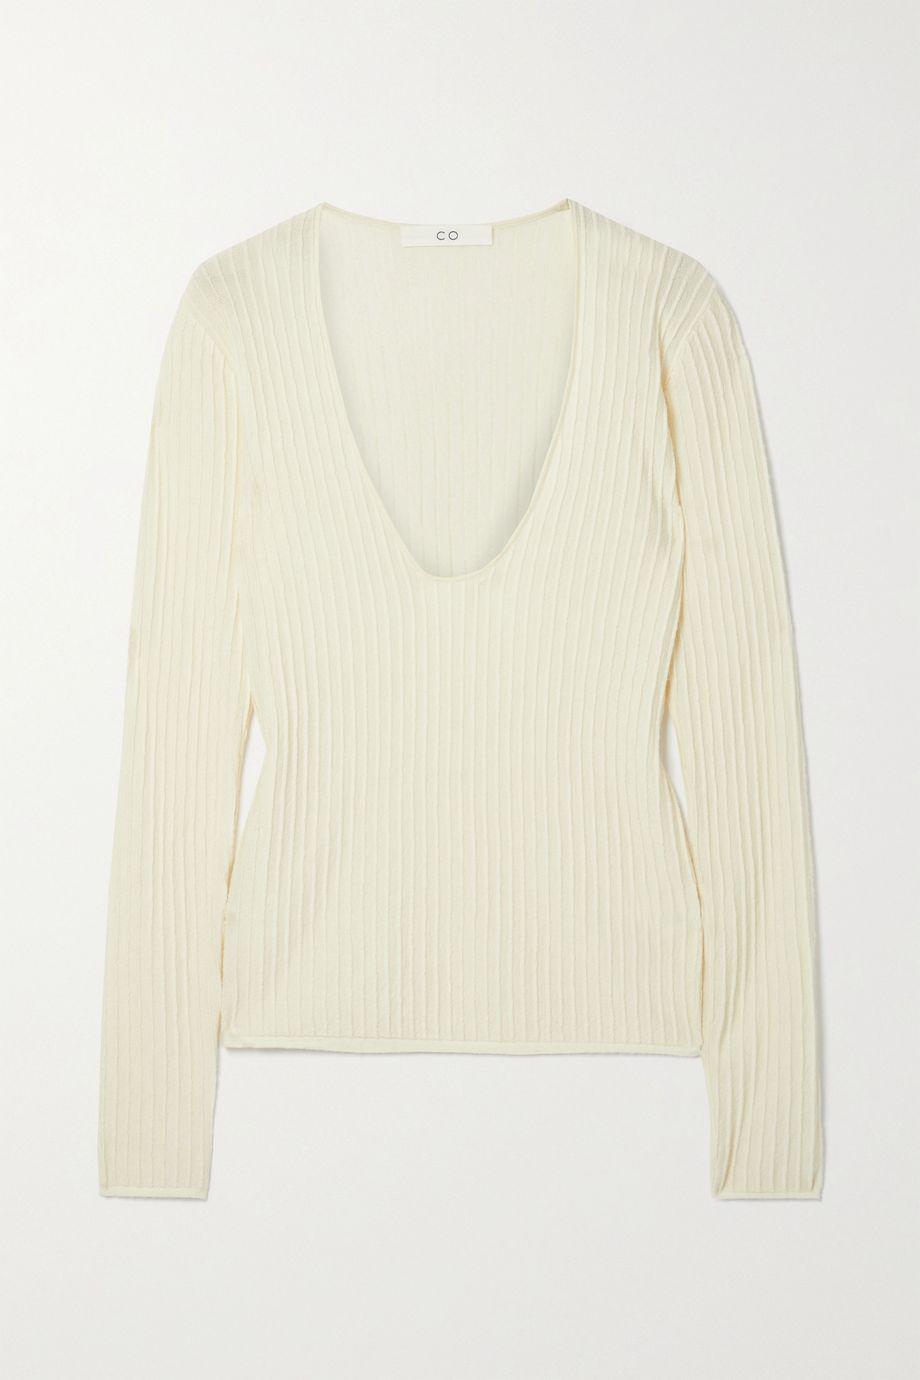 Ribbed cashmere sweater by CO